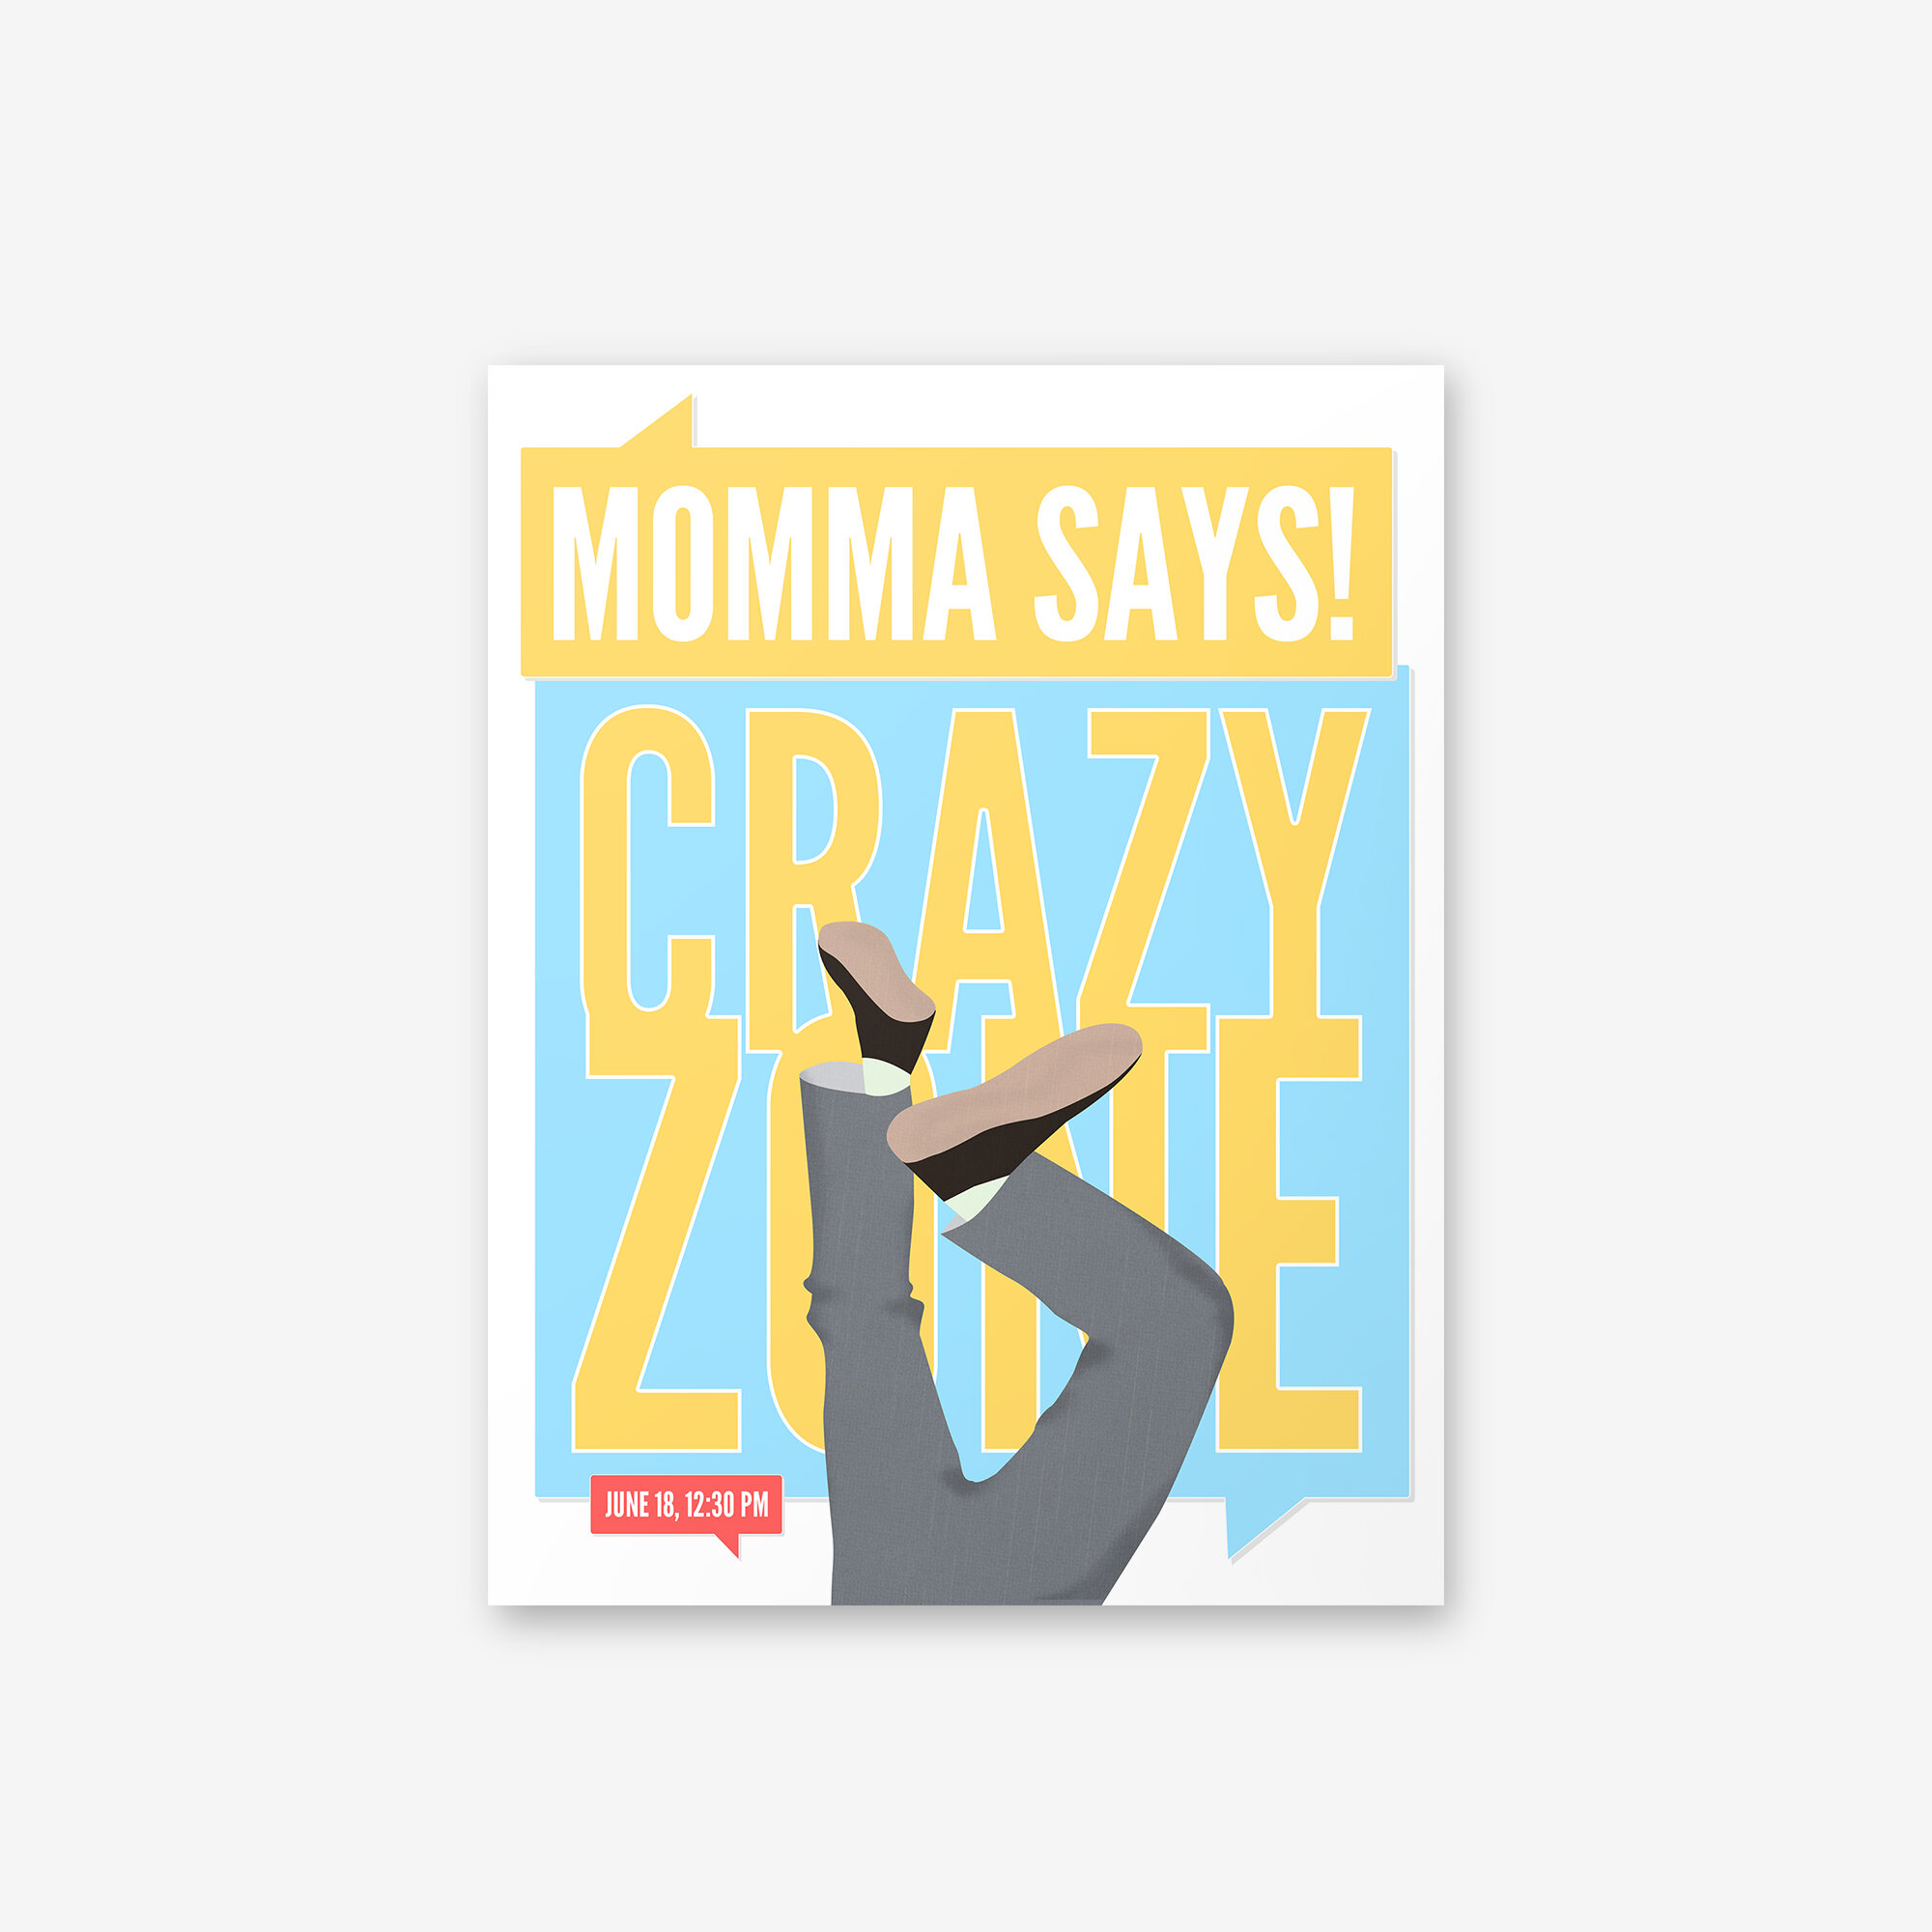 BVH_Posters_Crazy+Zone_Momma+Says.jpg